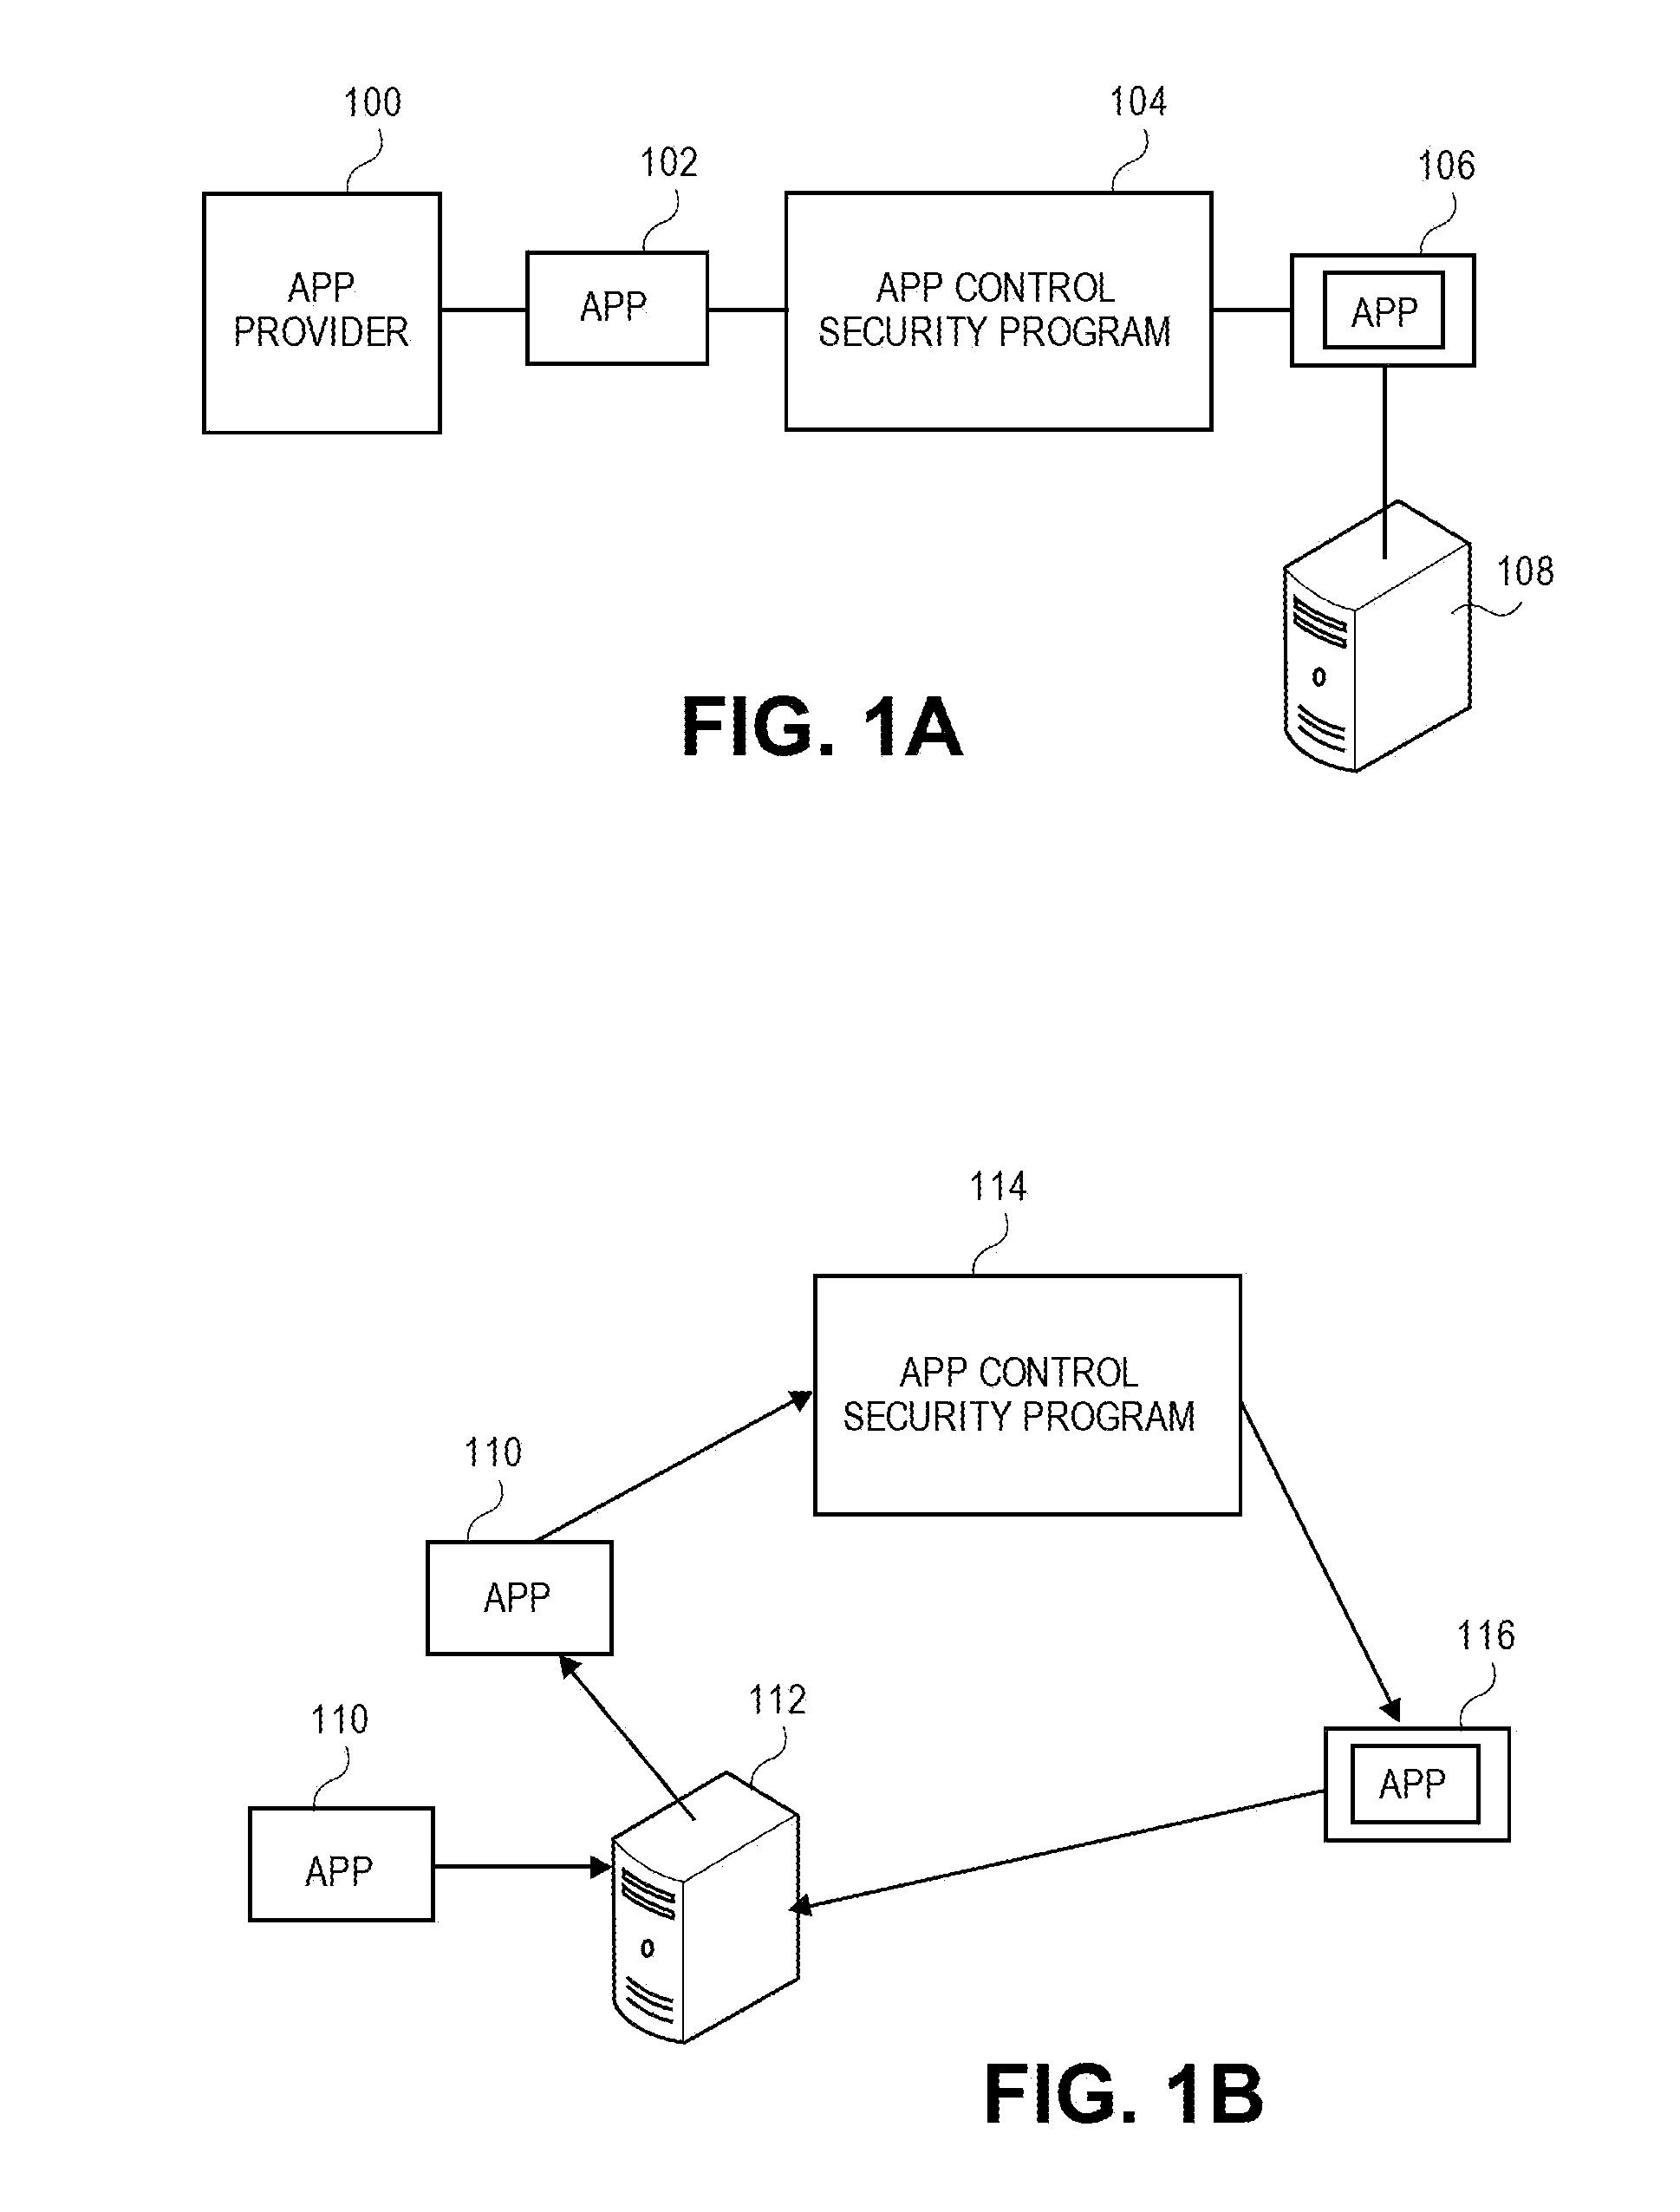 Automatic certificate enrollment in a special-purpose appliance